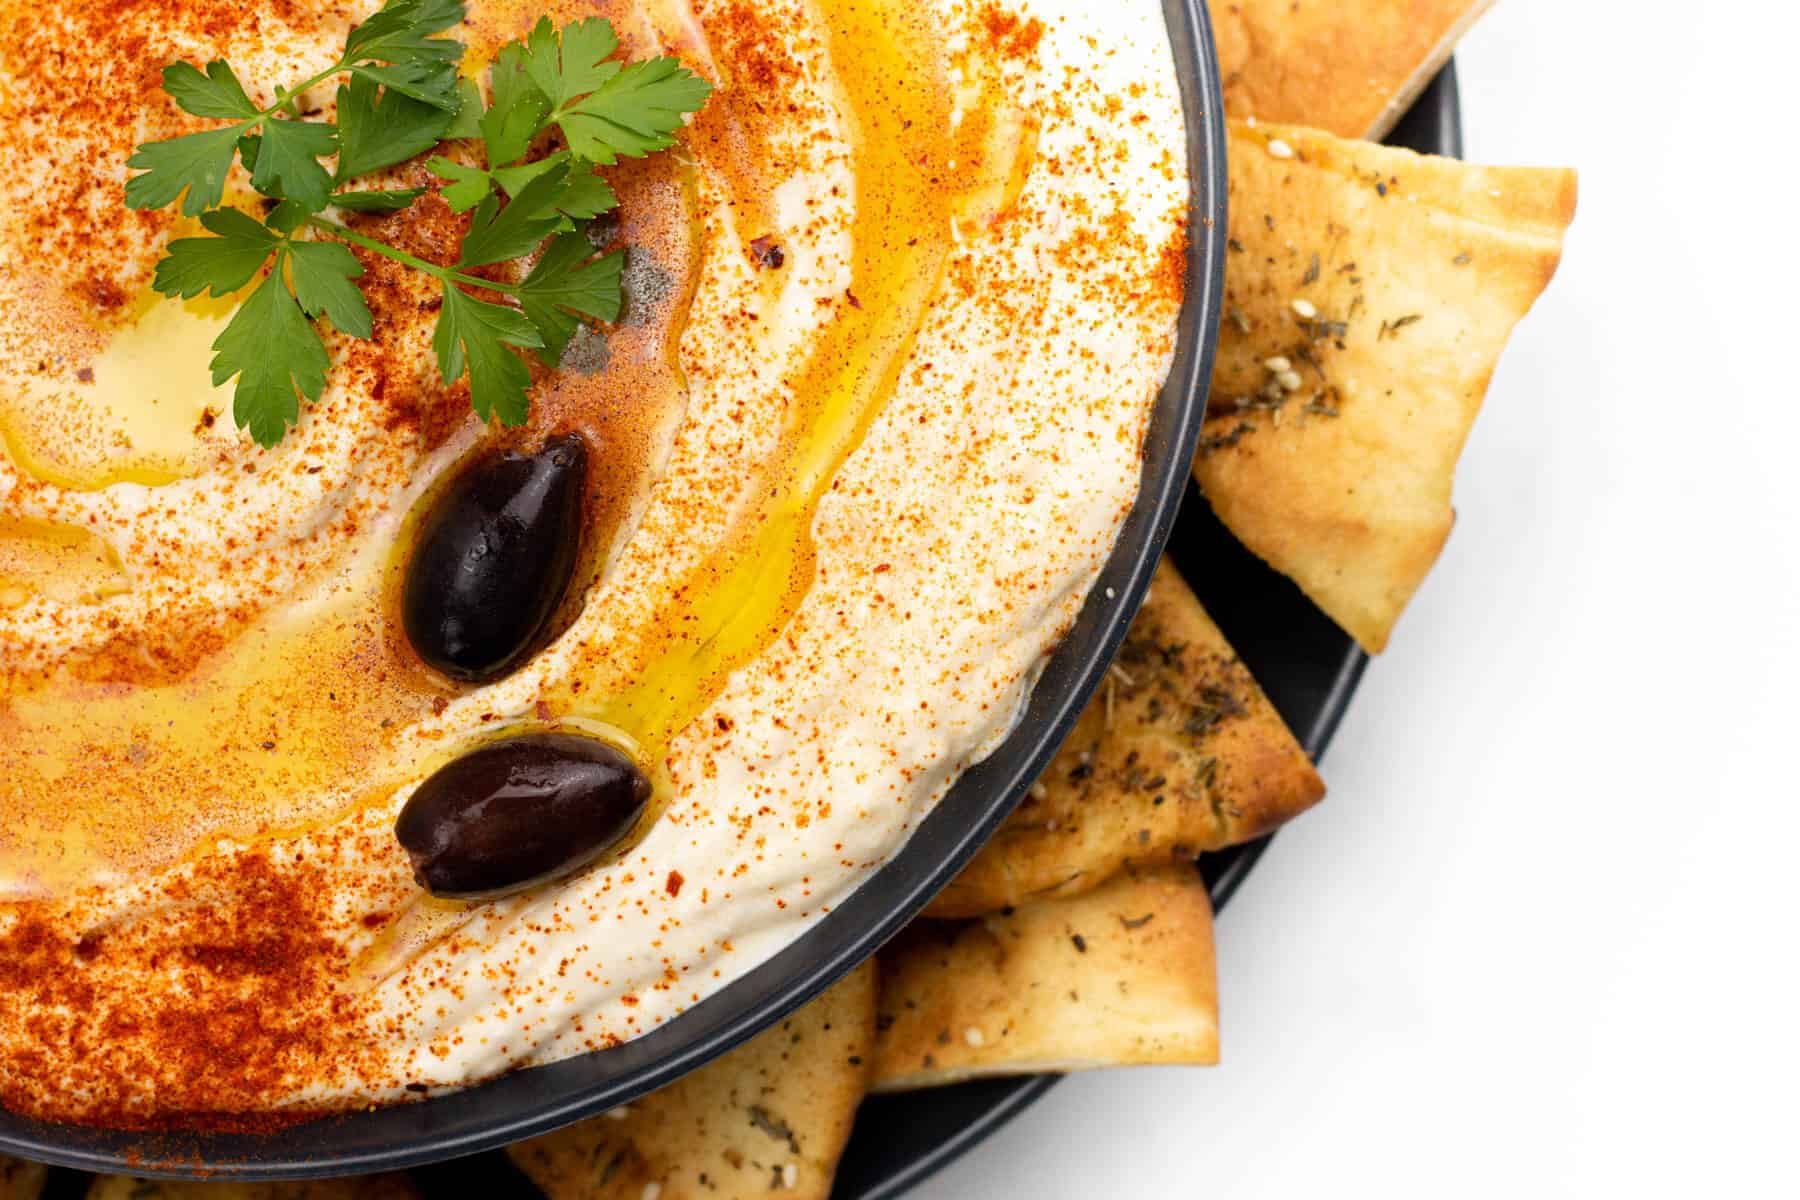 A bowl of whipped feta dip with crackers and olives.